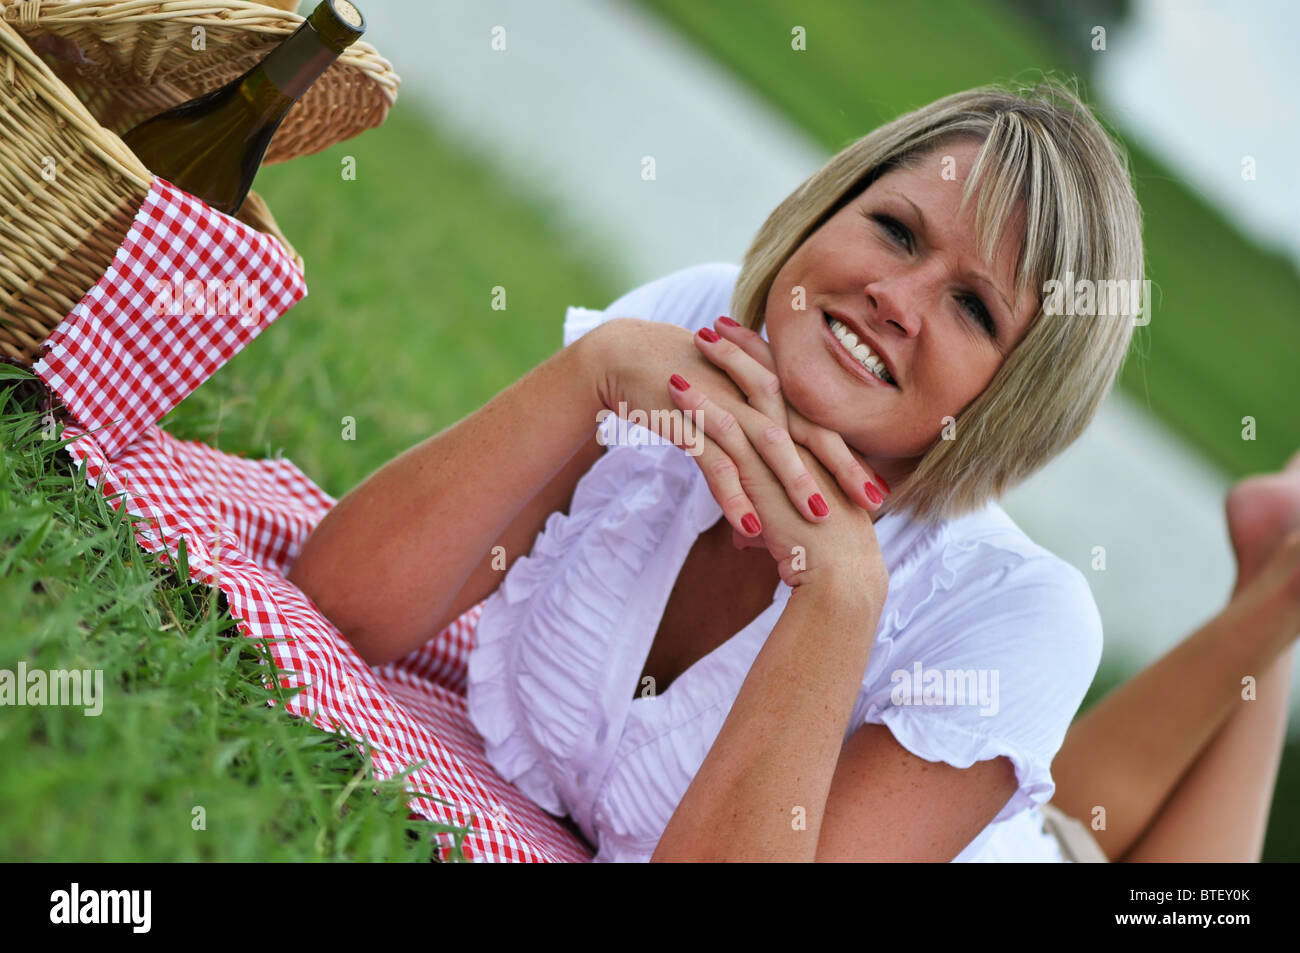 Young blond woman on picnic with wine, basket, gingham blanket and napkin. Stock Photo